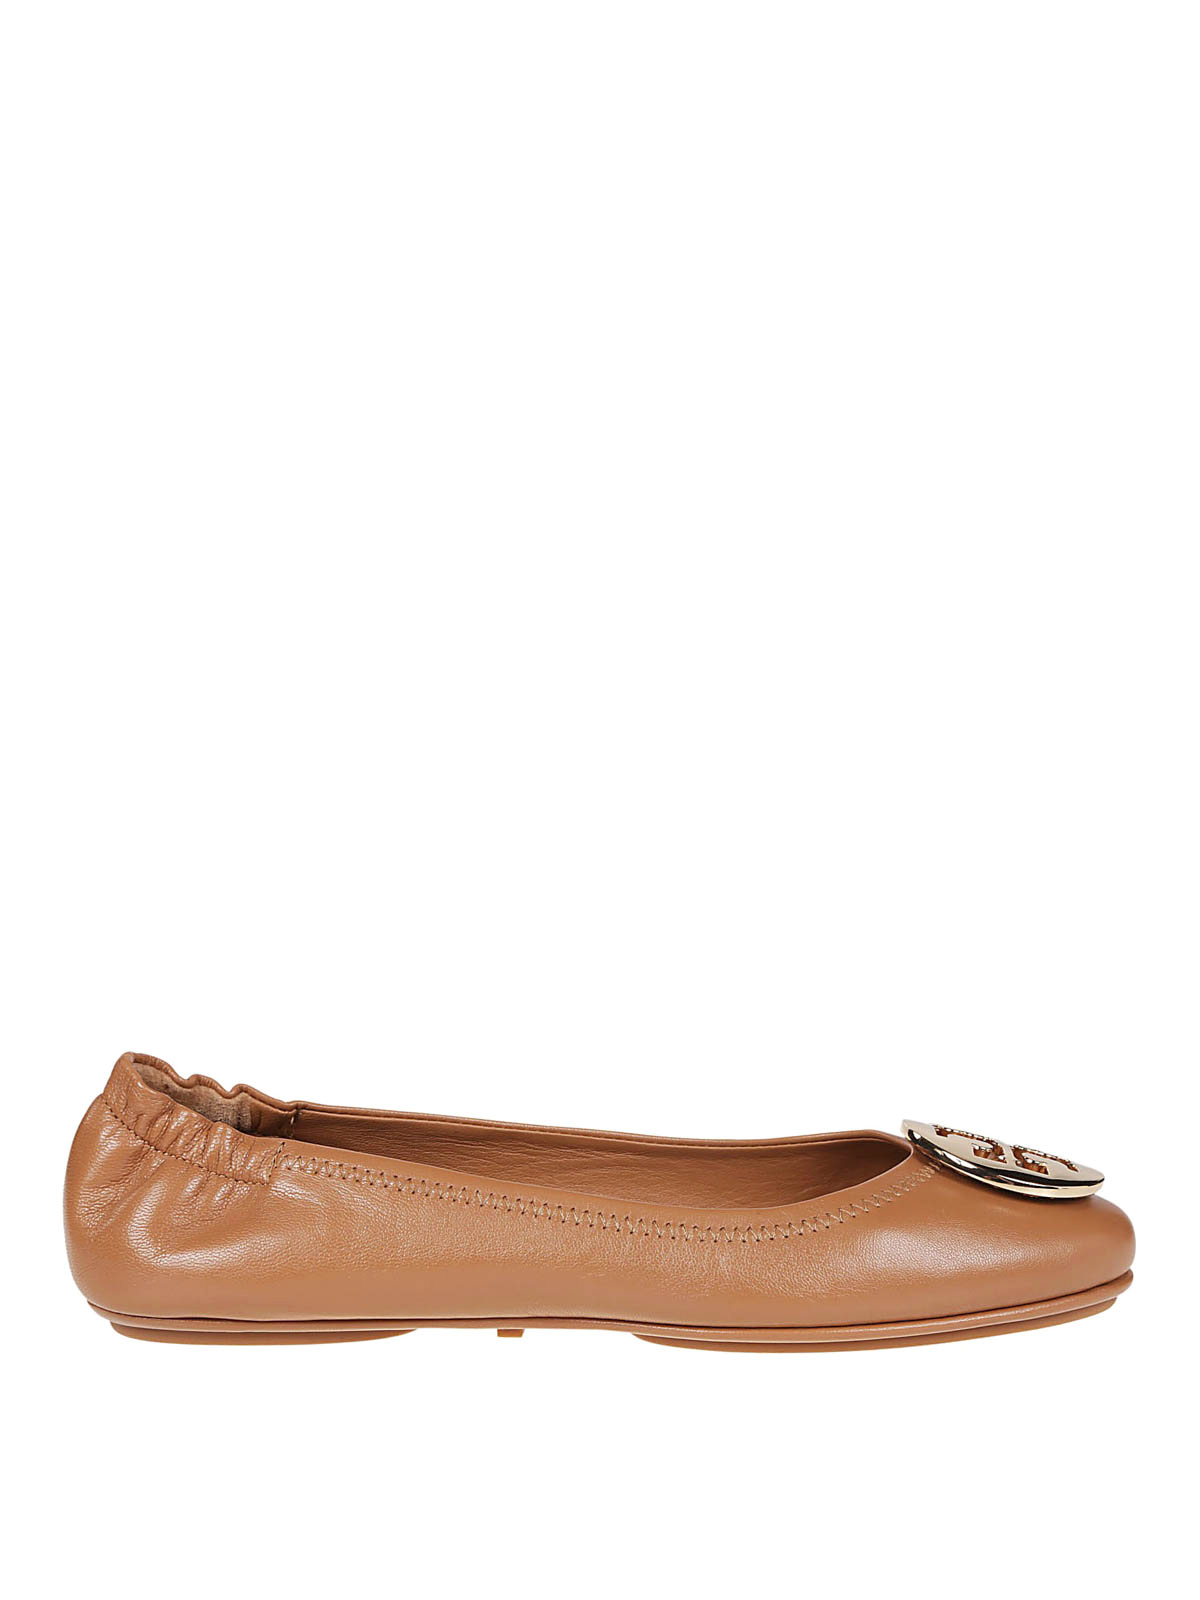 tan leather flat shoes